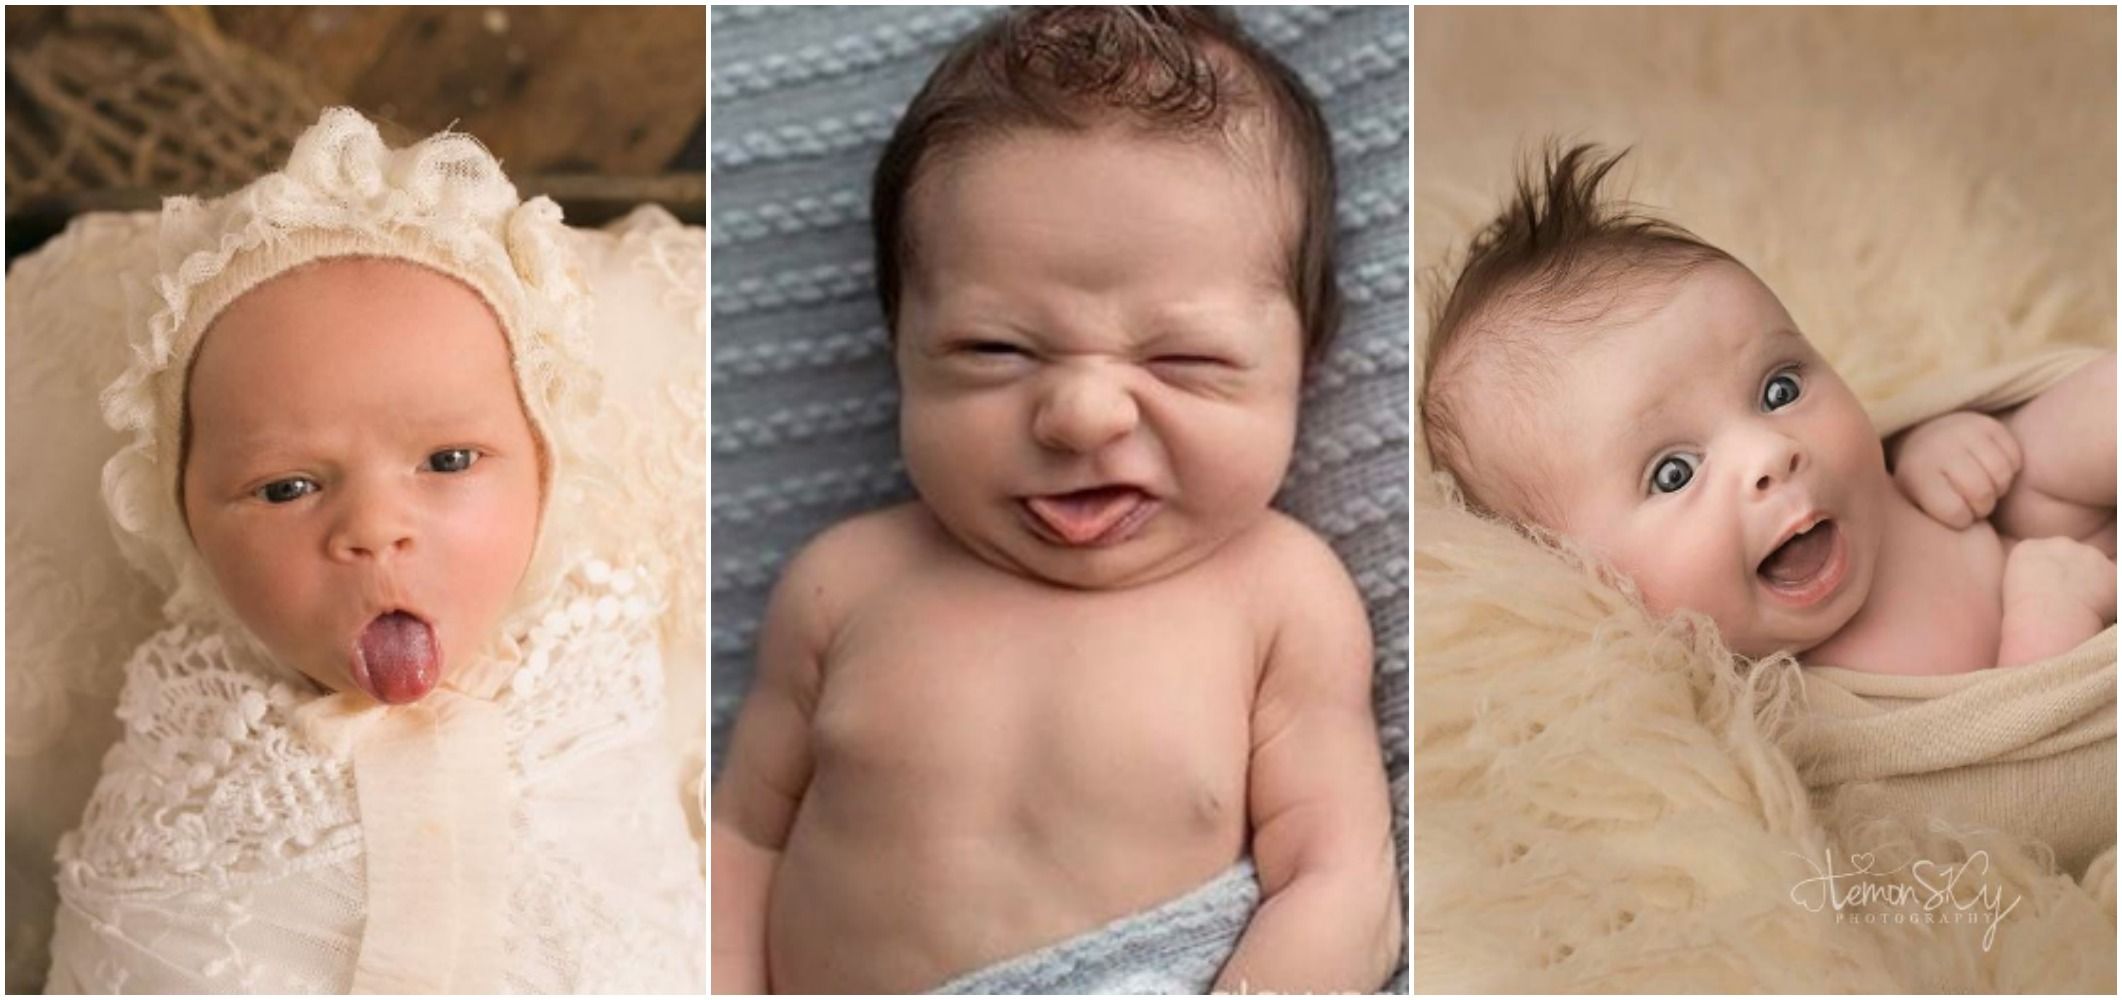 Newborn Photo Shoots Gone Wrong - Funny Baby Photos